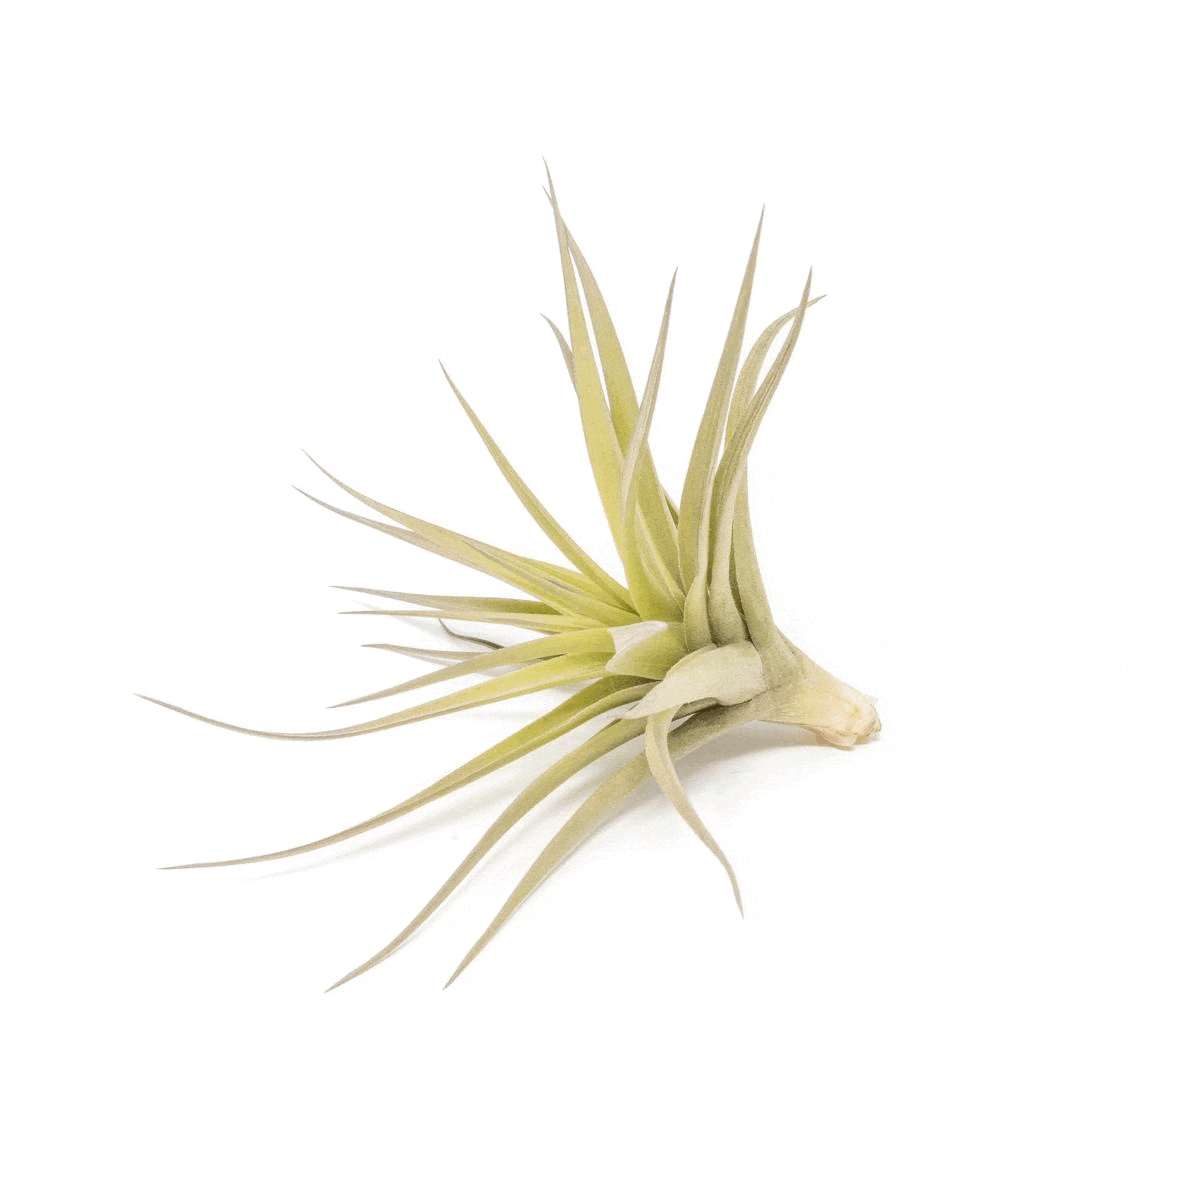 Tillandsia Aeranthos - Clavel del Aire - "Carnation of the Air" Air Plants